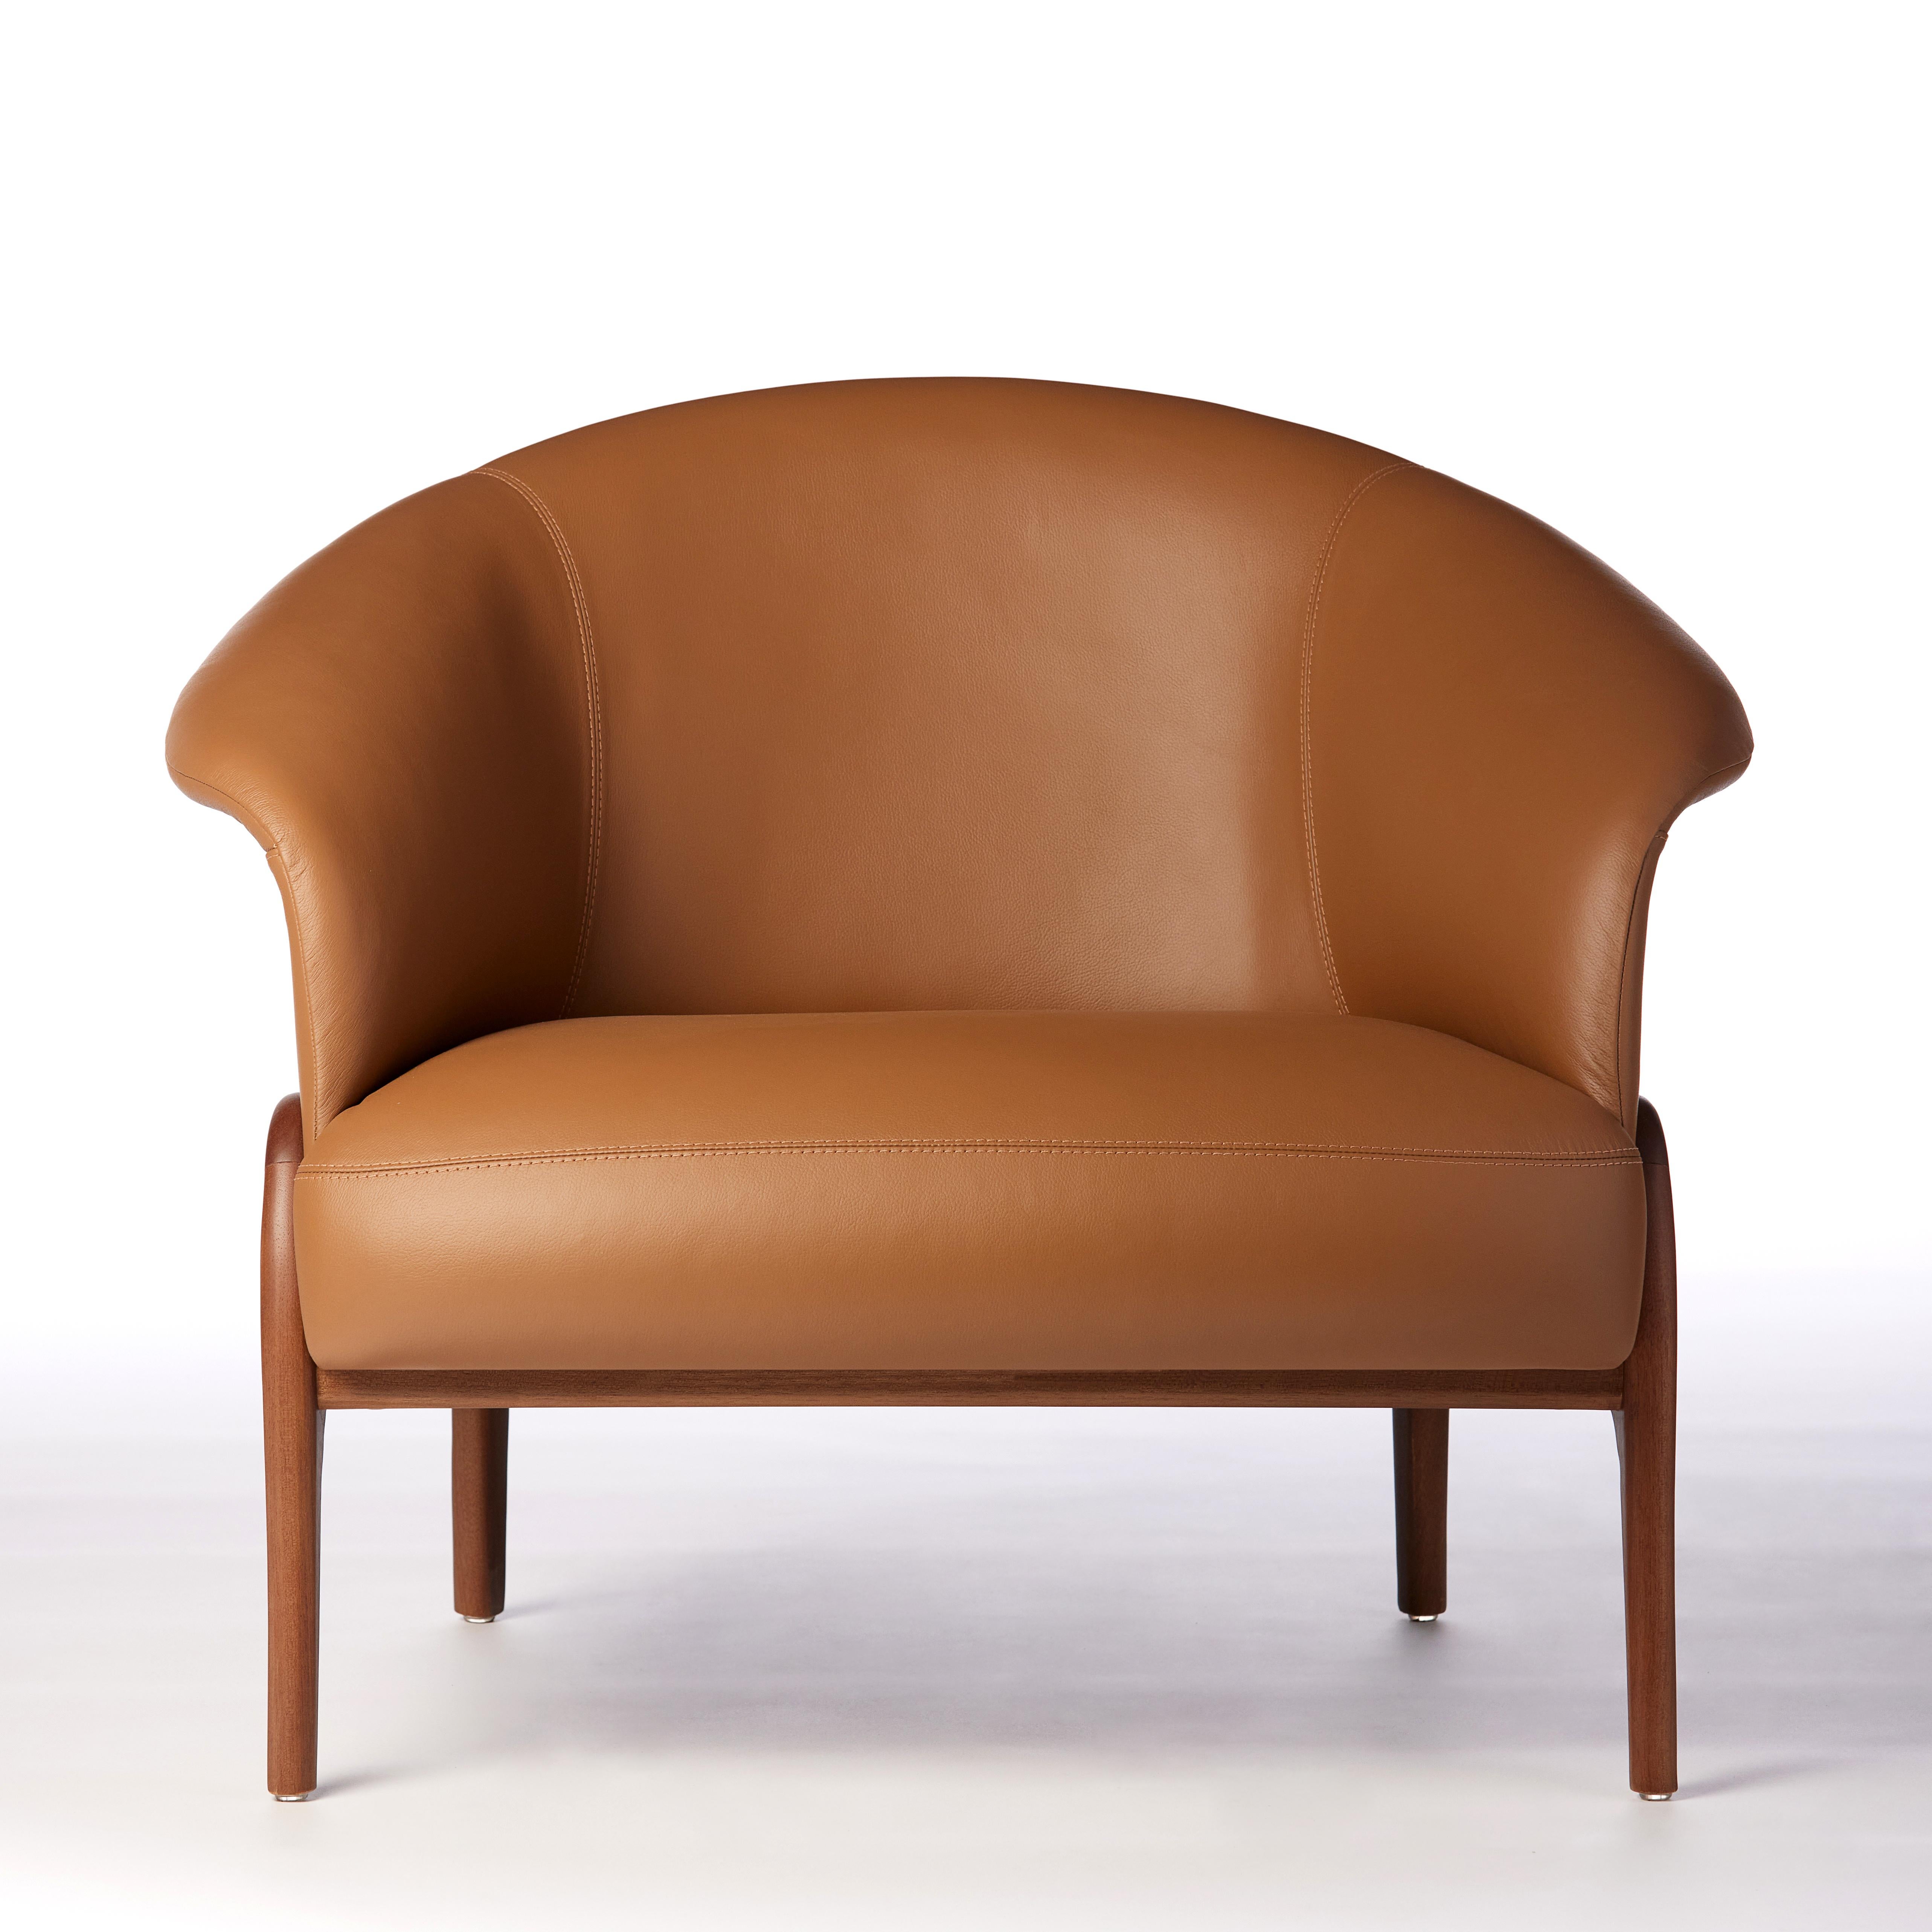 Brazilian Modern Organic Style Collana Armchair in Solid Wood, Leather Flexible Seating For Sale